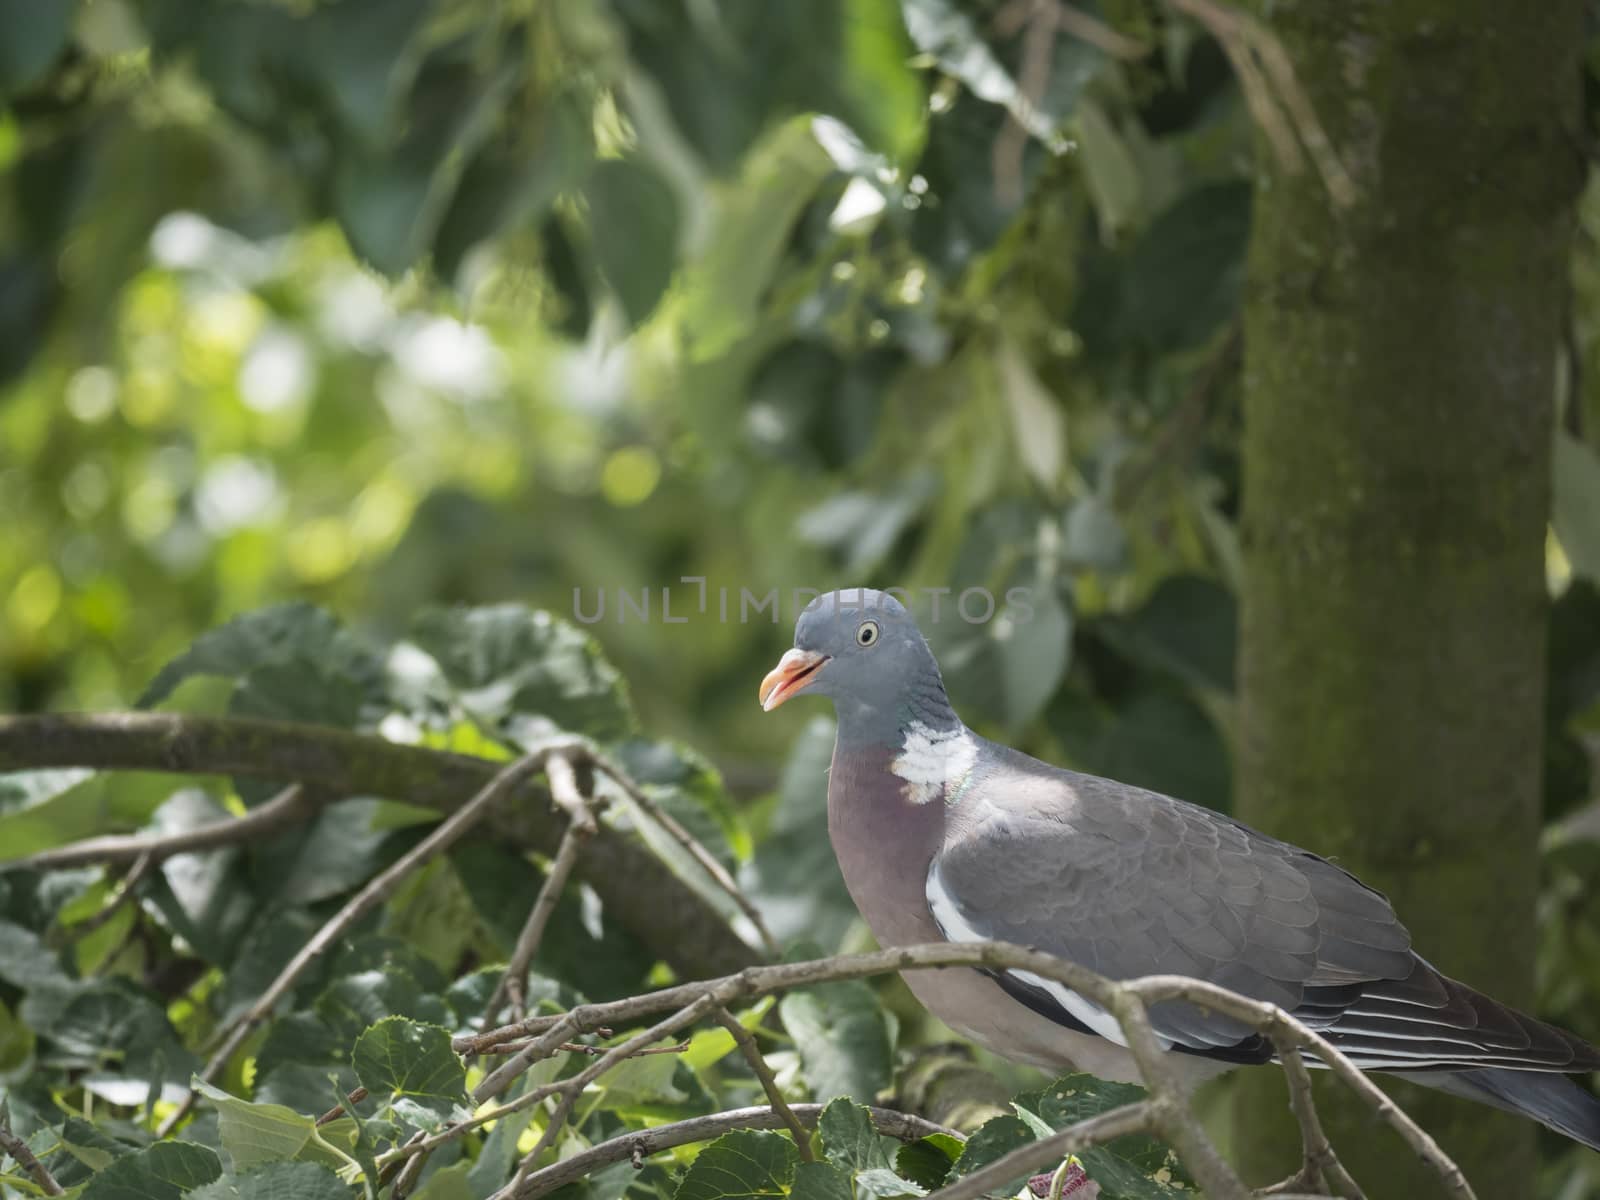 Close up common Wood pigeon Columba palumbus perched on linden tree branch between green leaves by Henkeova